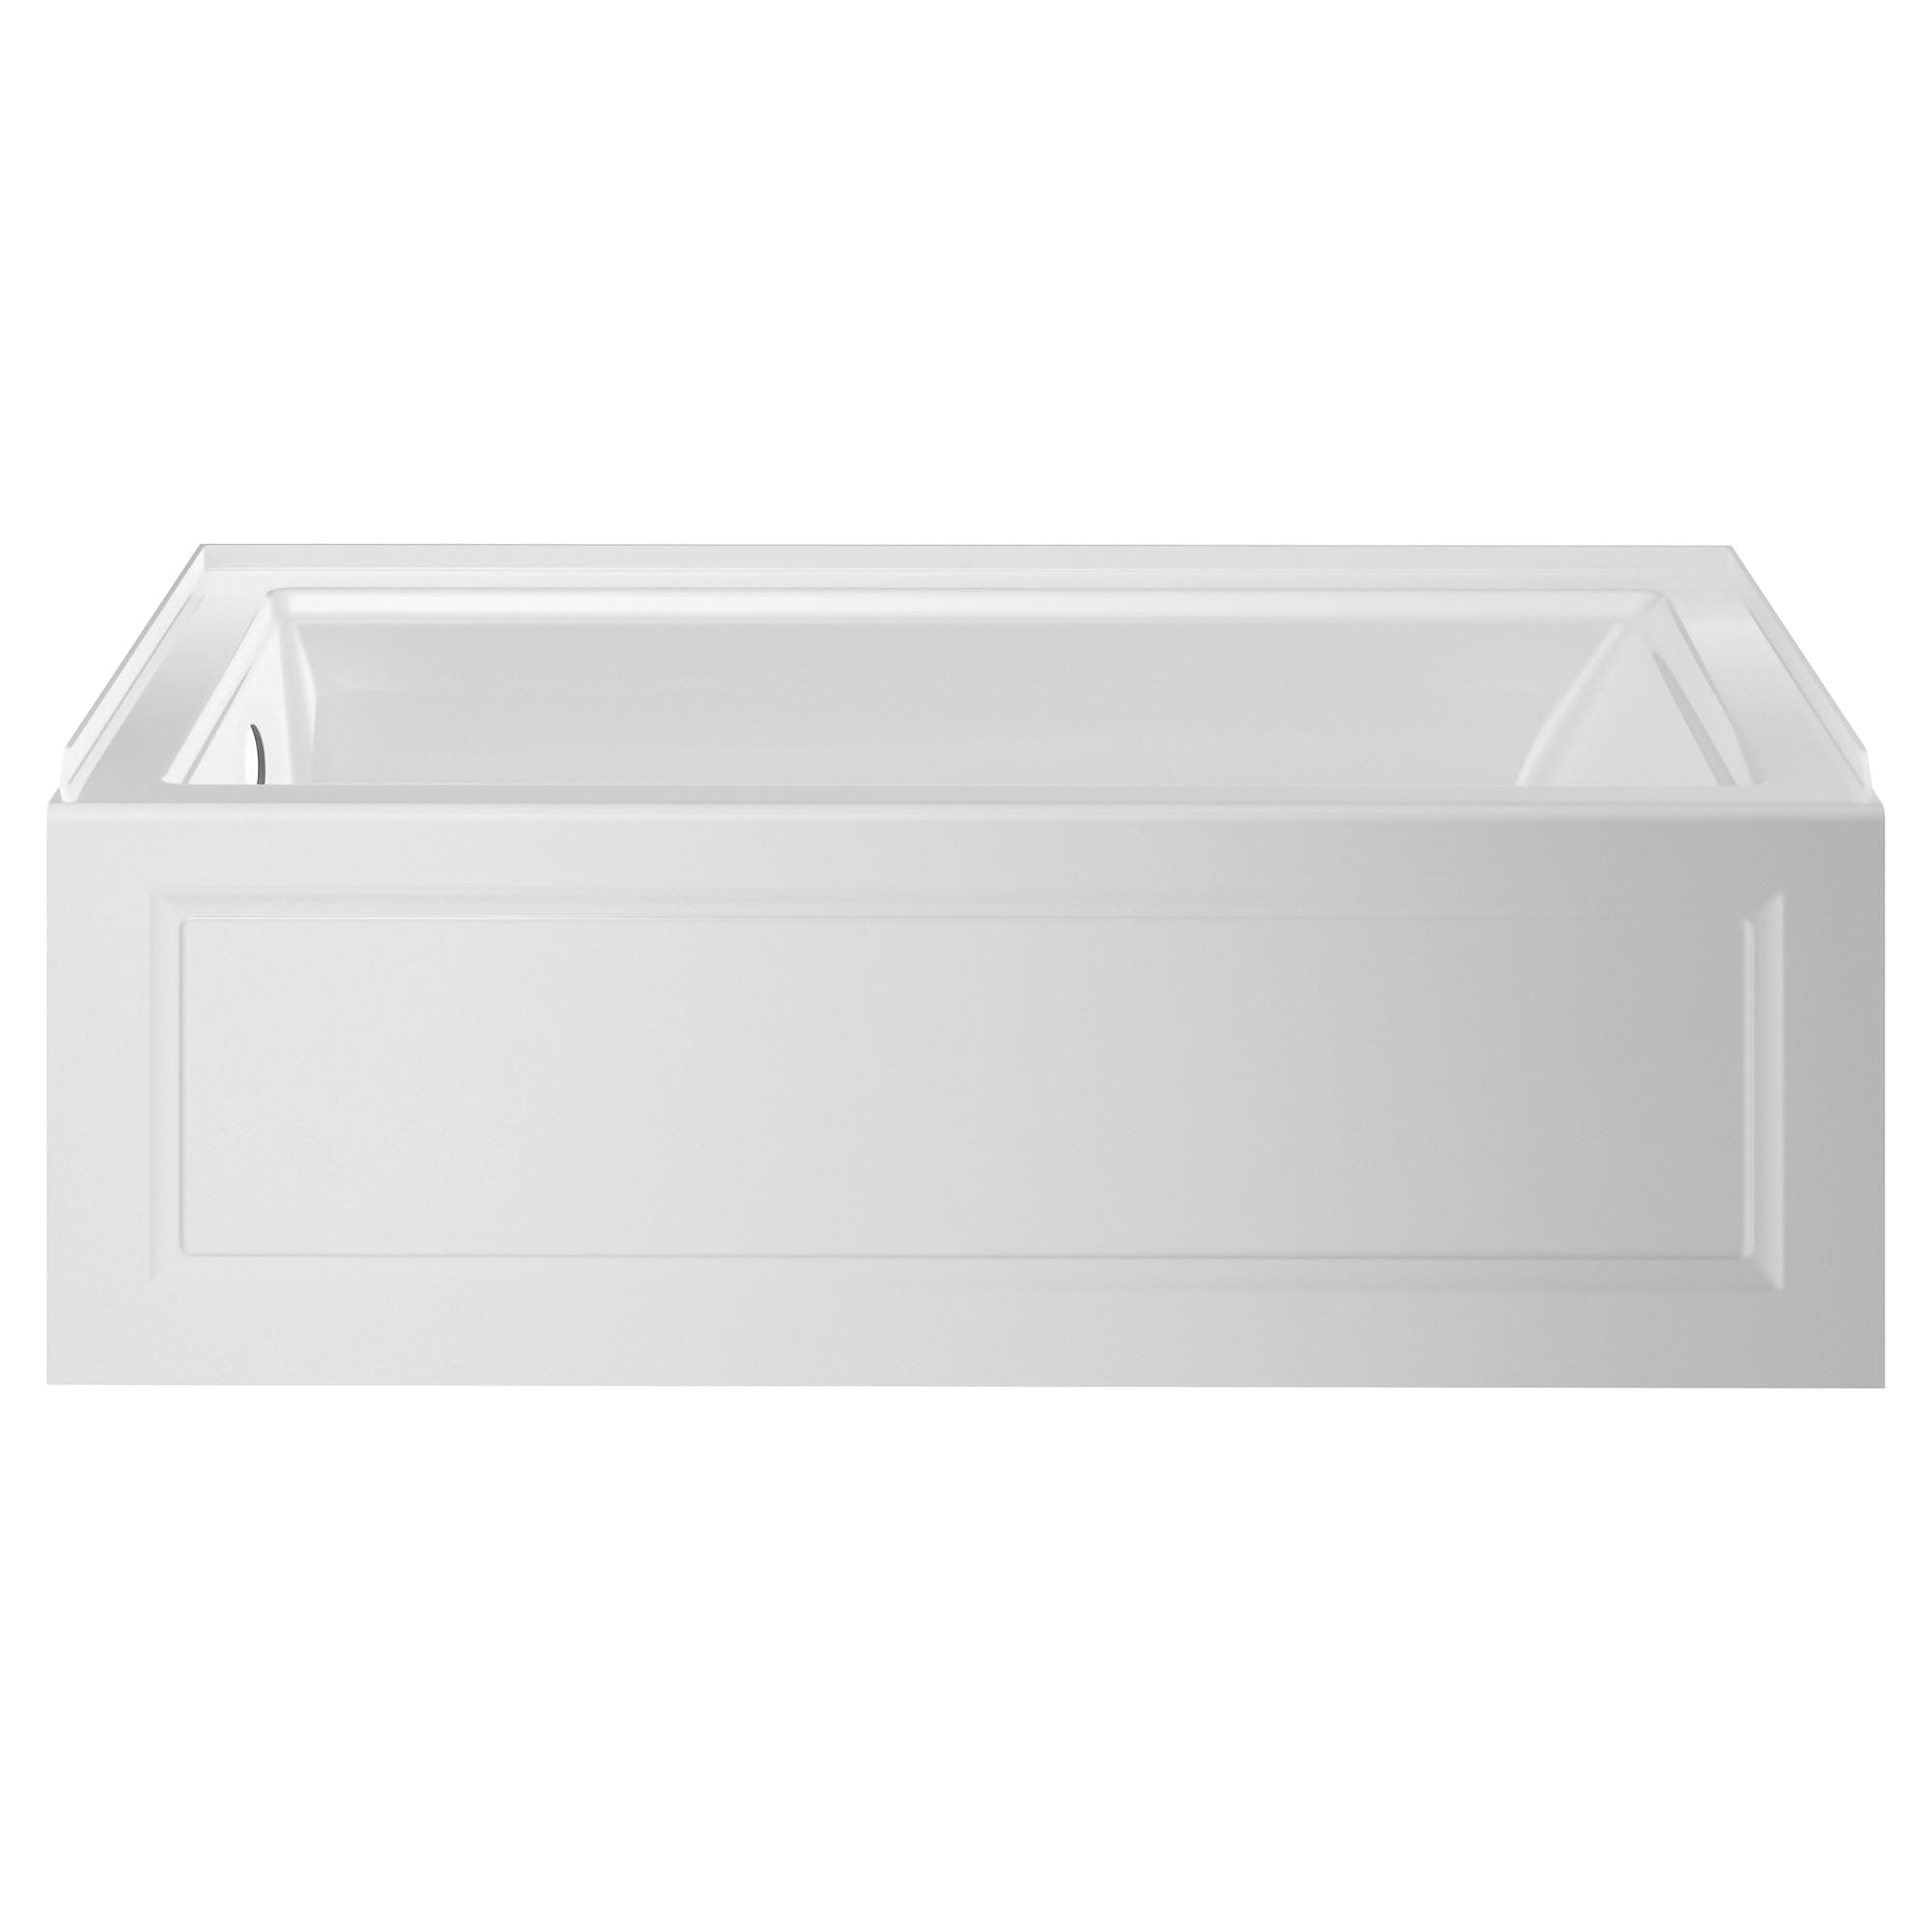 Town Square S 60 x 30 Inch Integral Apron Bathtub With Left Hand Outlet WHITE